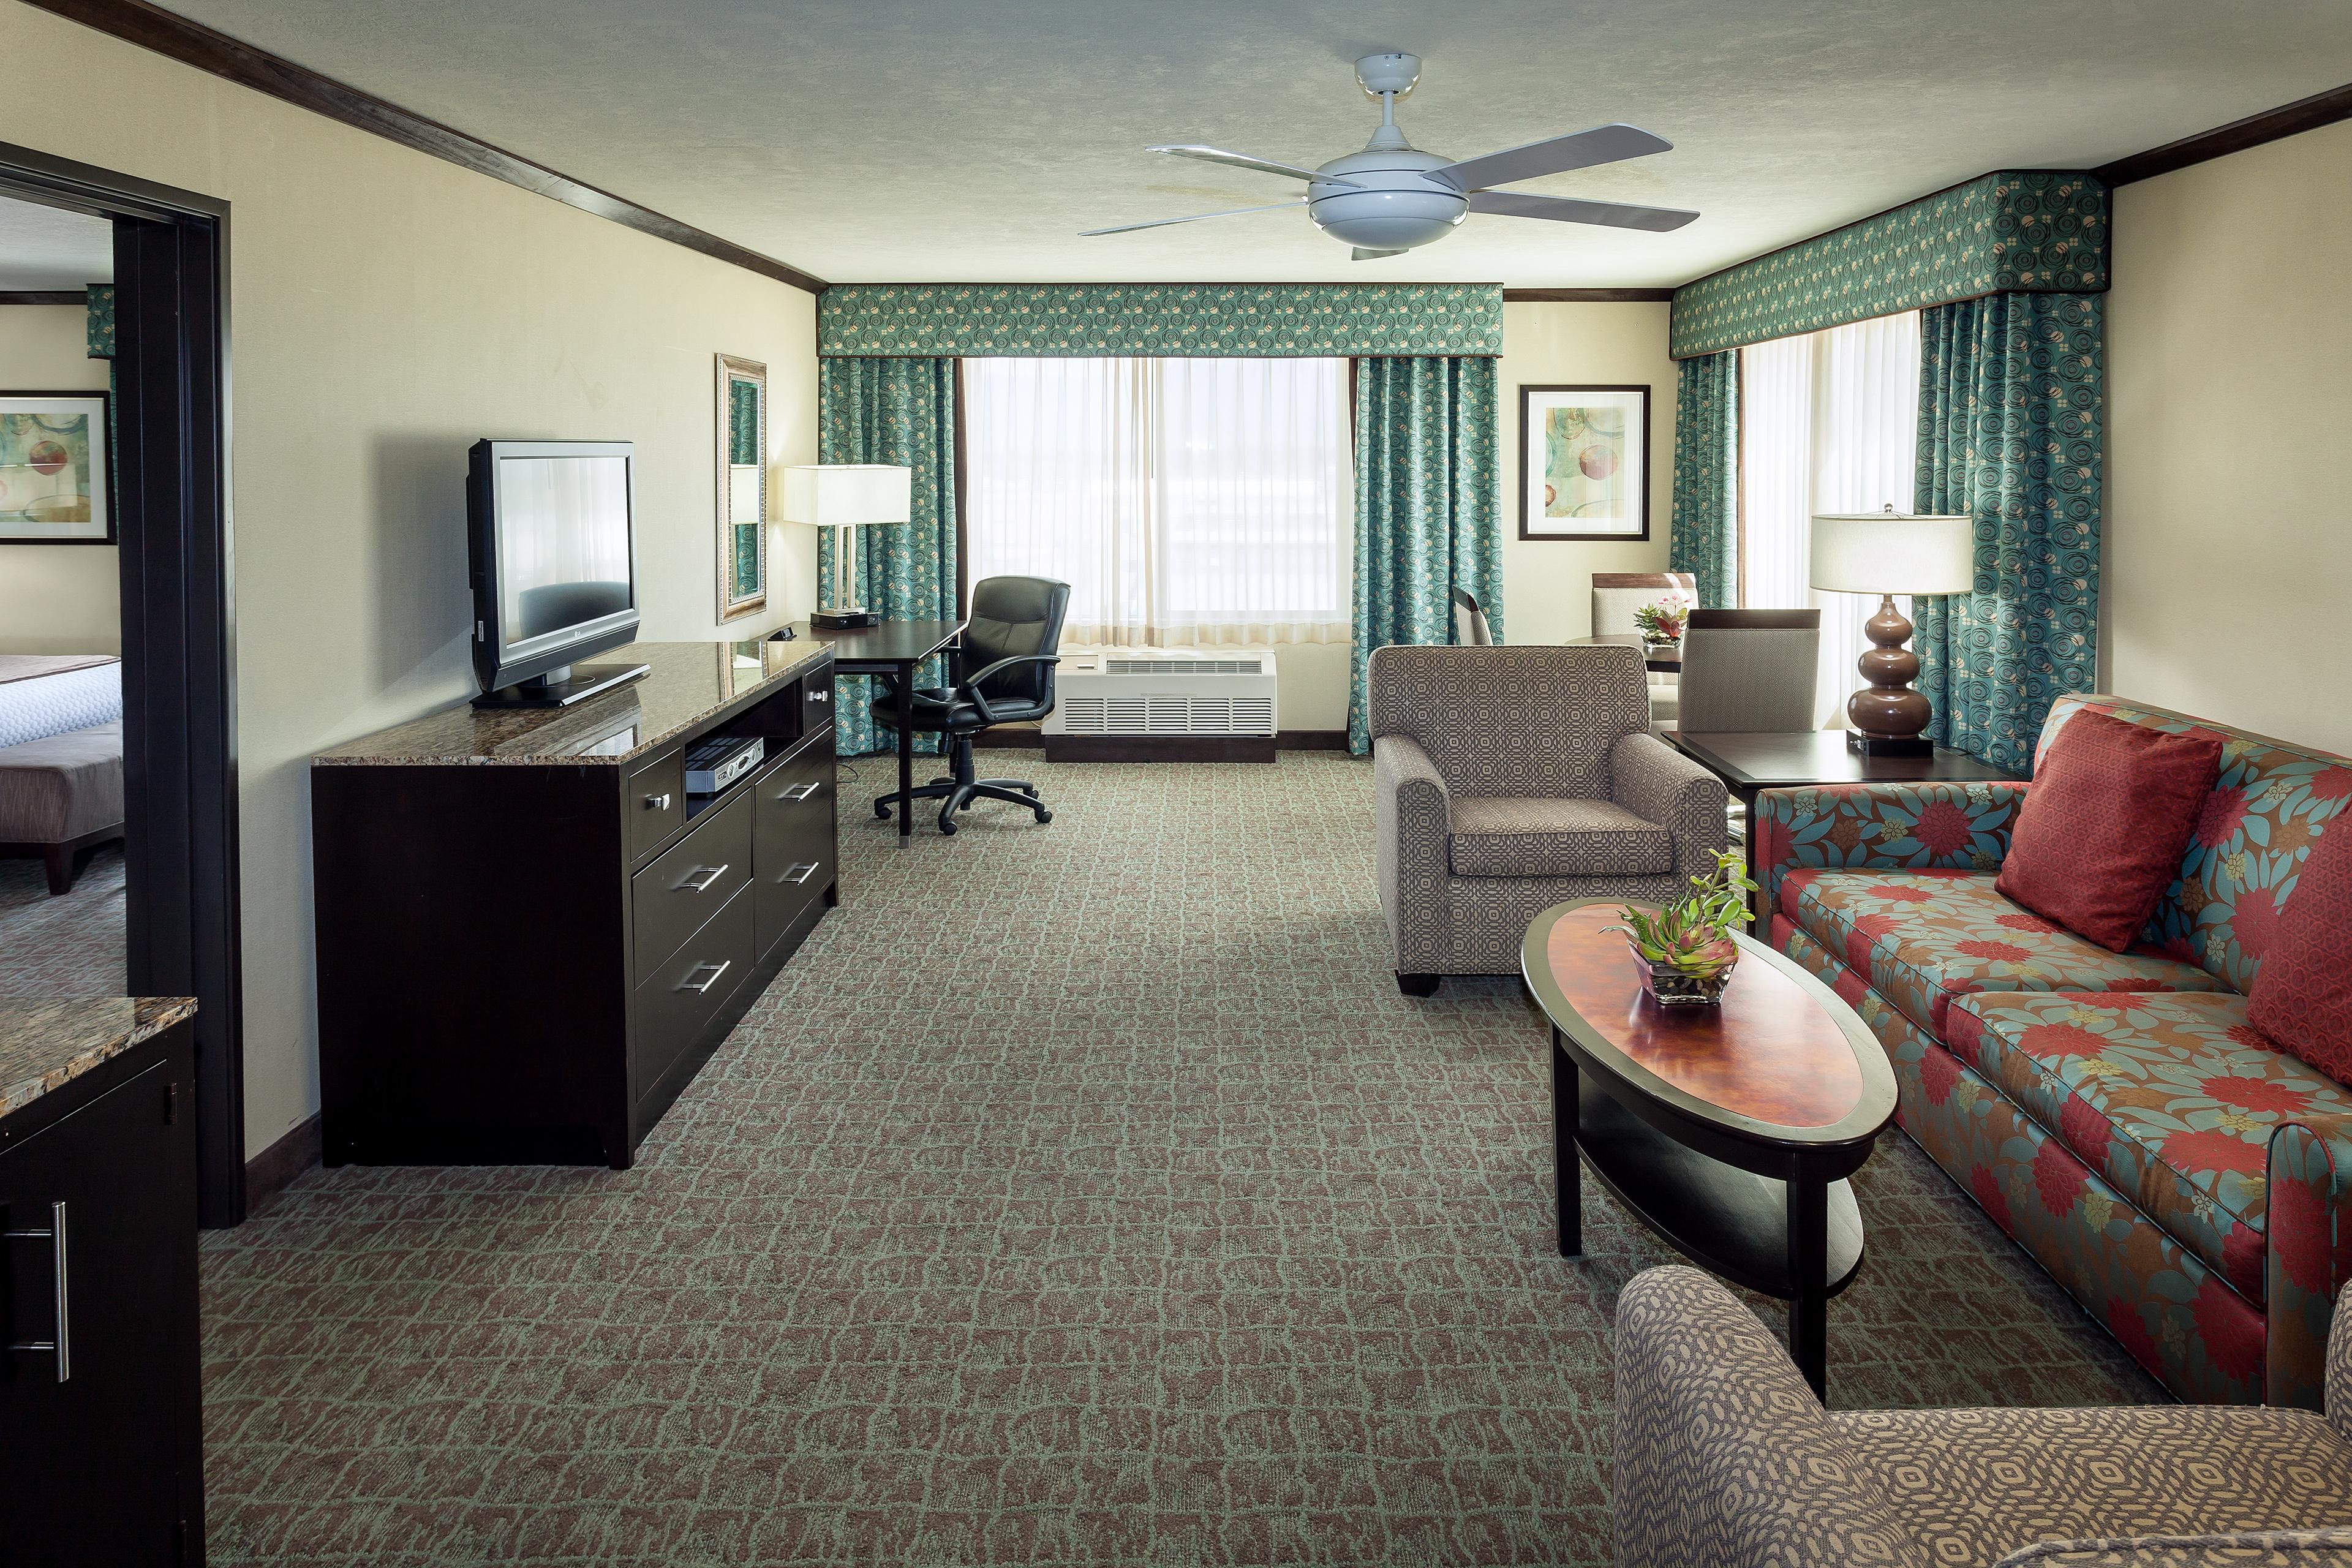 Our spacious guest suite is perfect for families